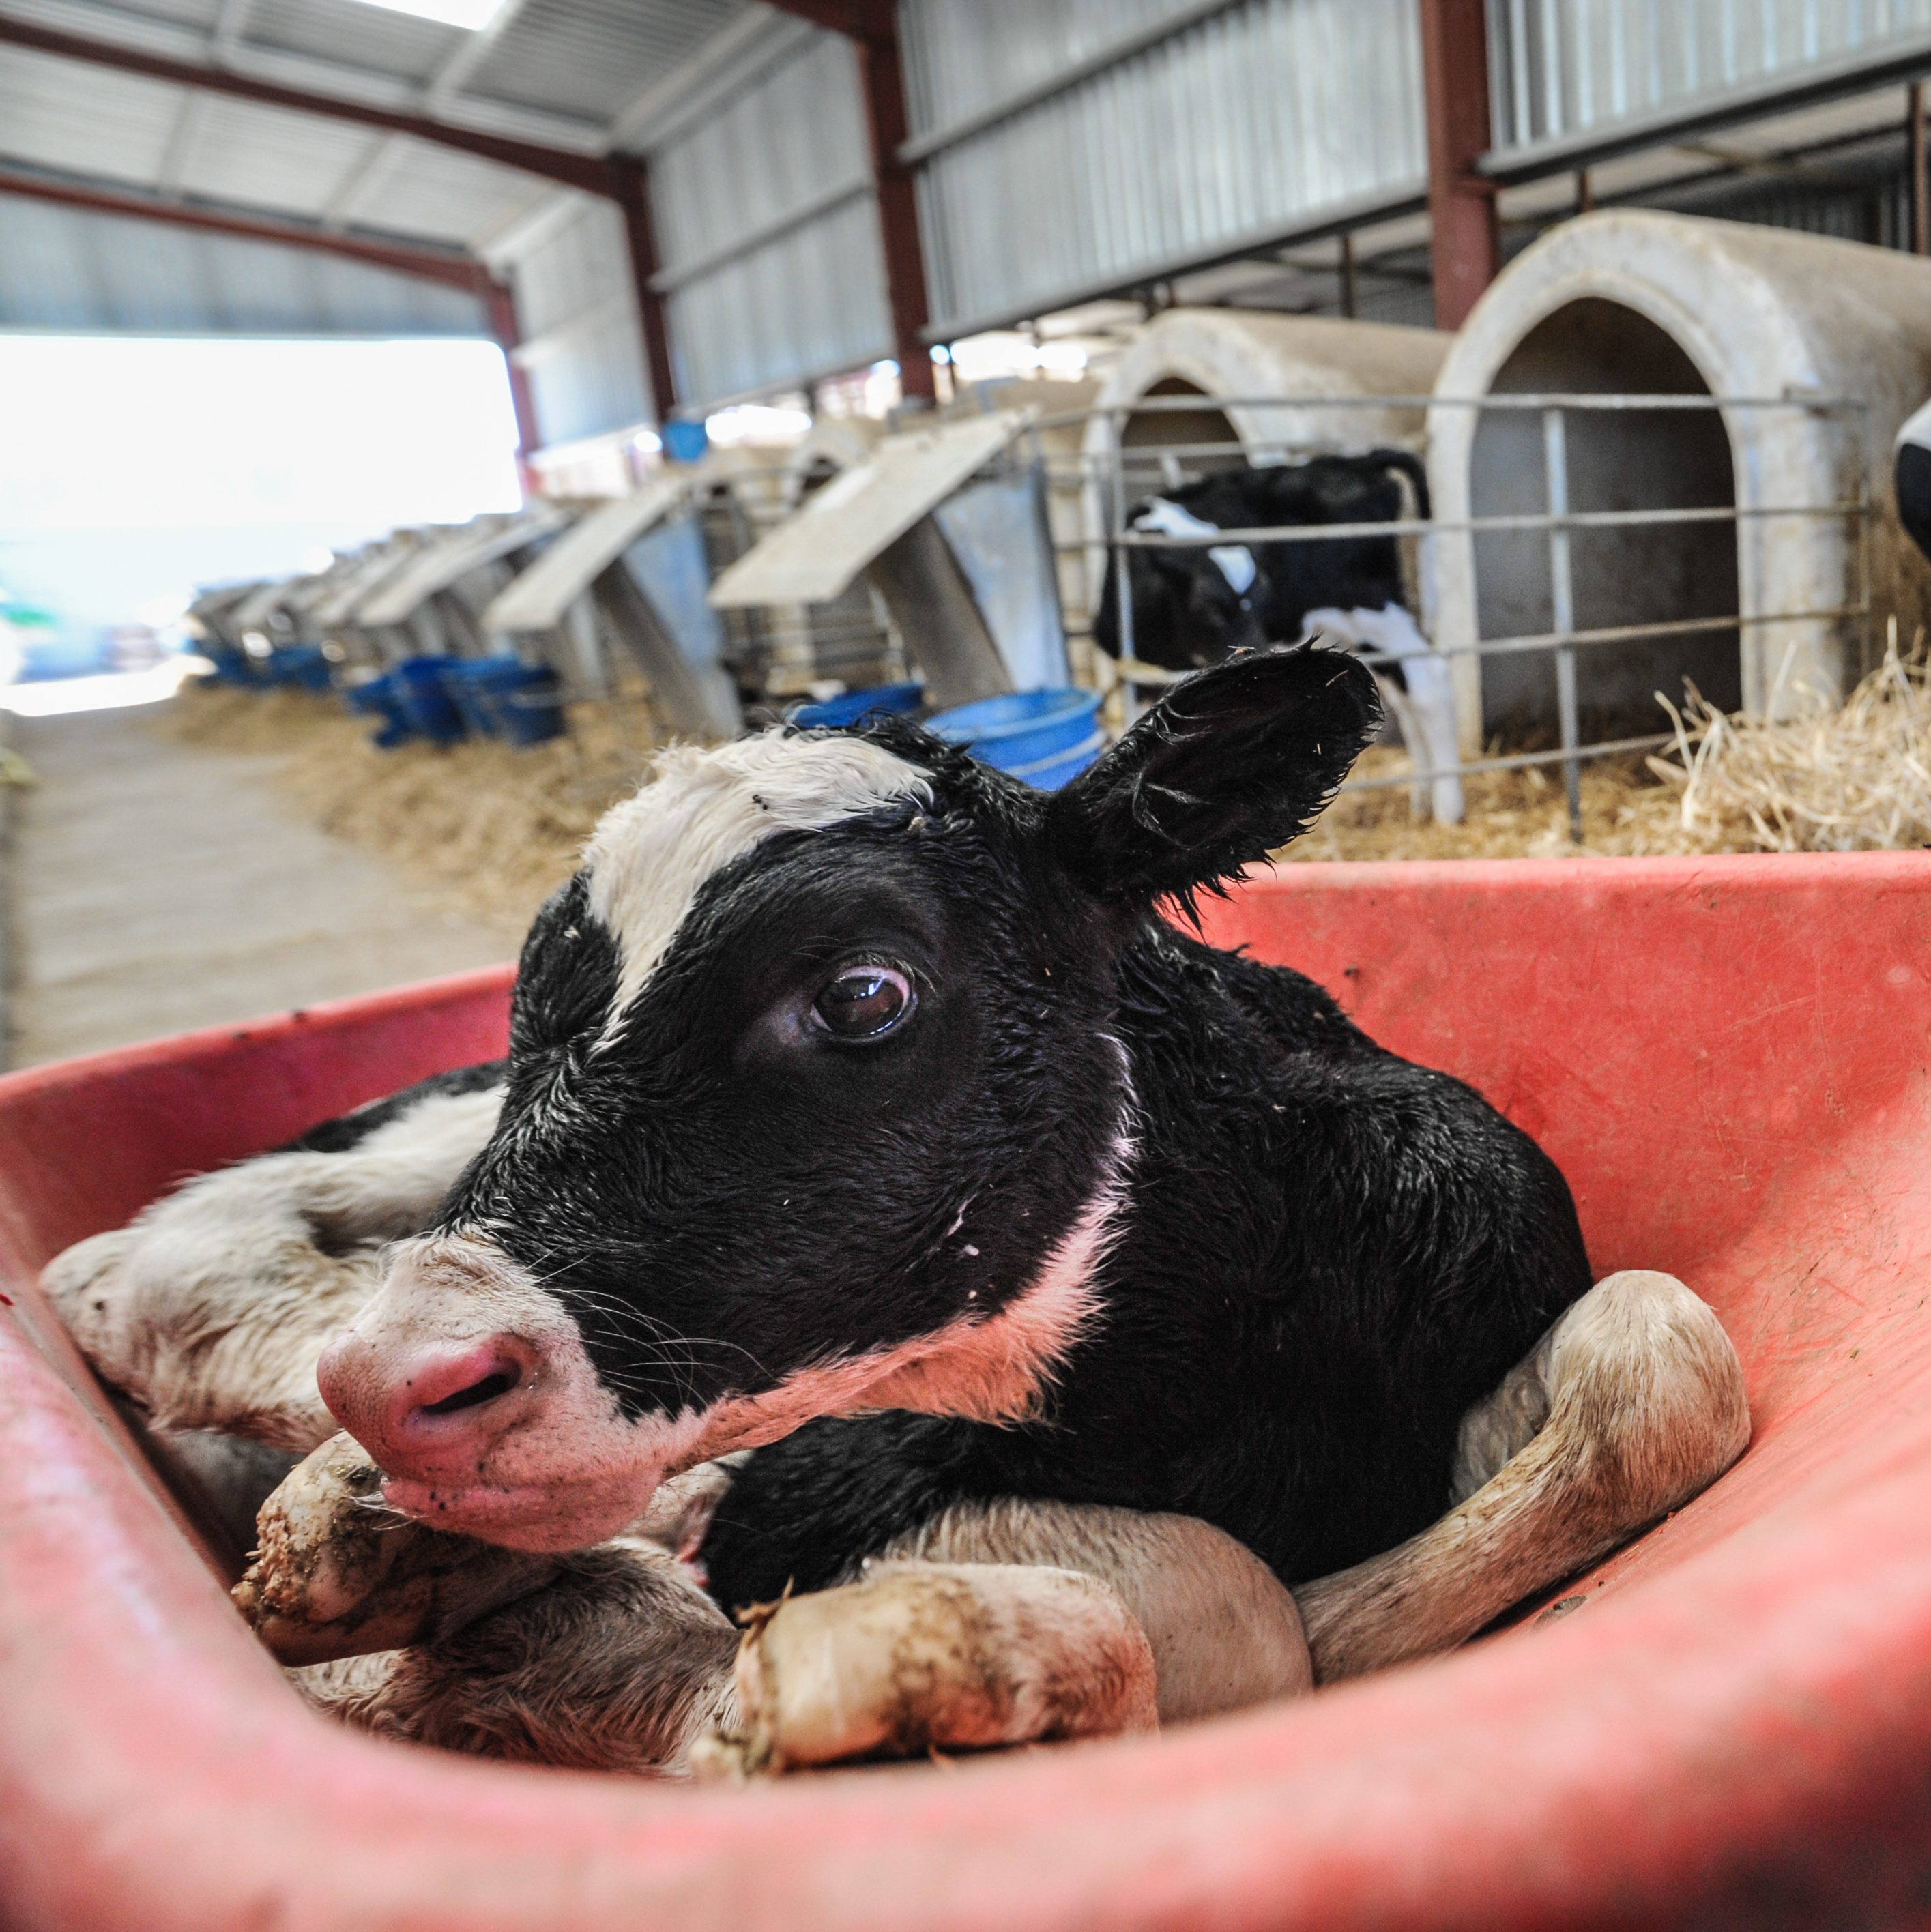 Newborn calf wheeled away from her mother to the veal crates at a dairy farm